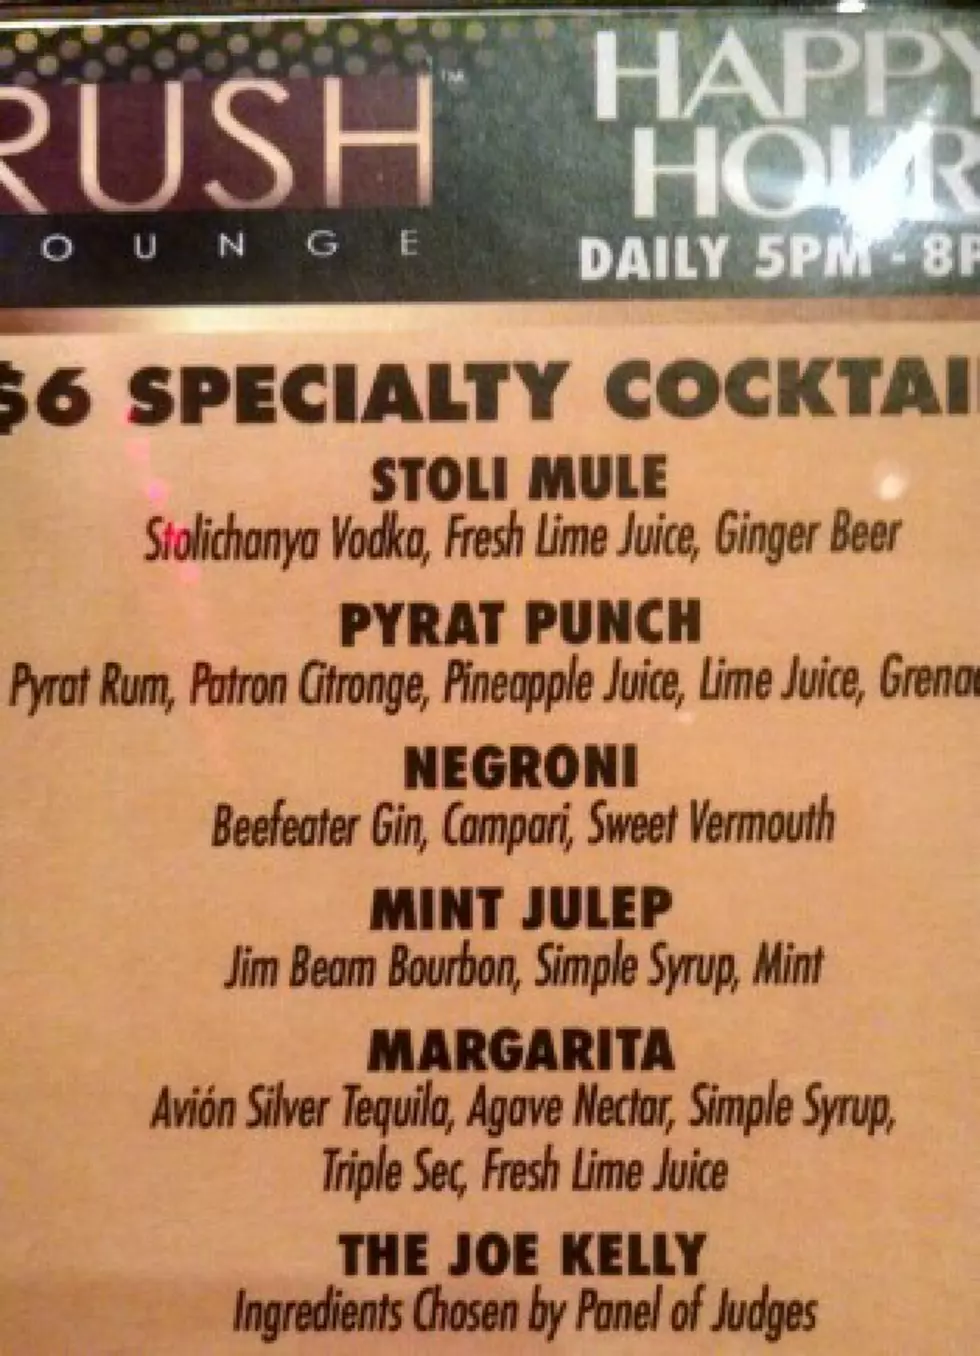 The Joe Kelly Drink Is Now Officially a Thing